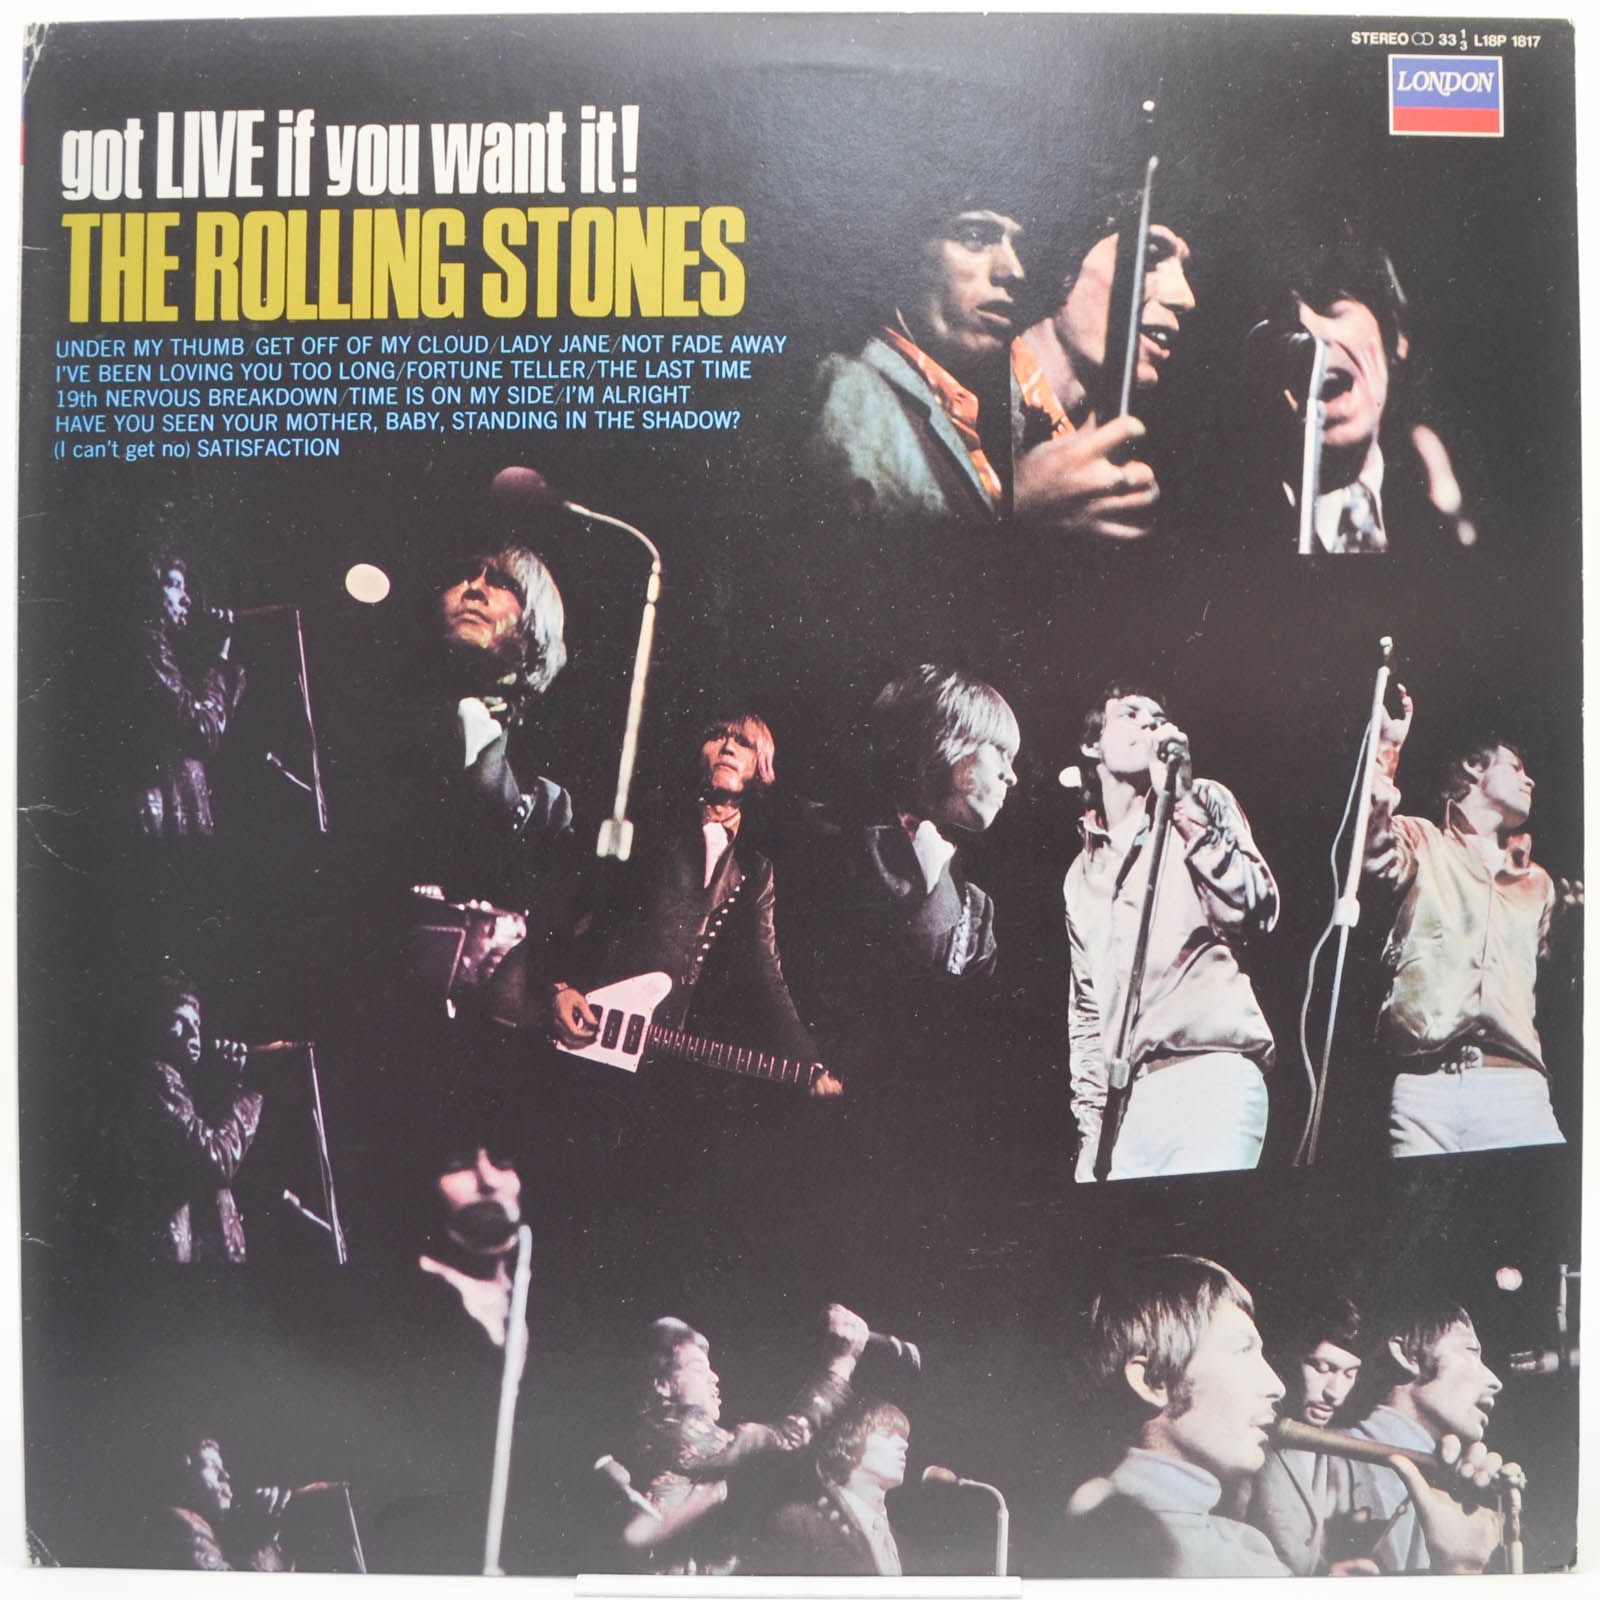 Rolling stones get. Диск Роллинг стоунз 1977. The Rolling Stones got Live if you want it 1966. Диск Роллинг стоунз 1974. The Rolling Stones time waits for no one: Anthology 1971–1977.